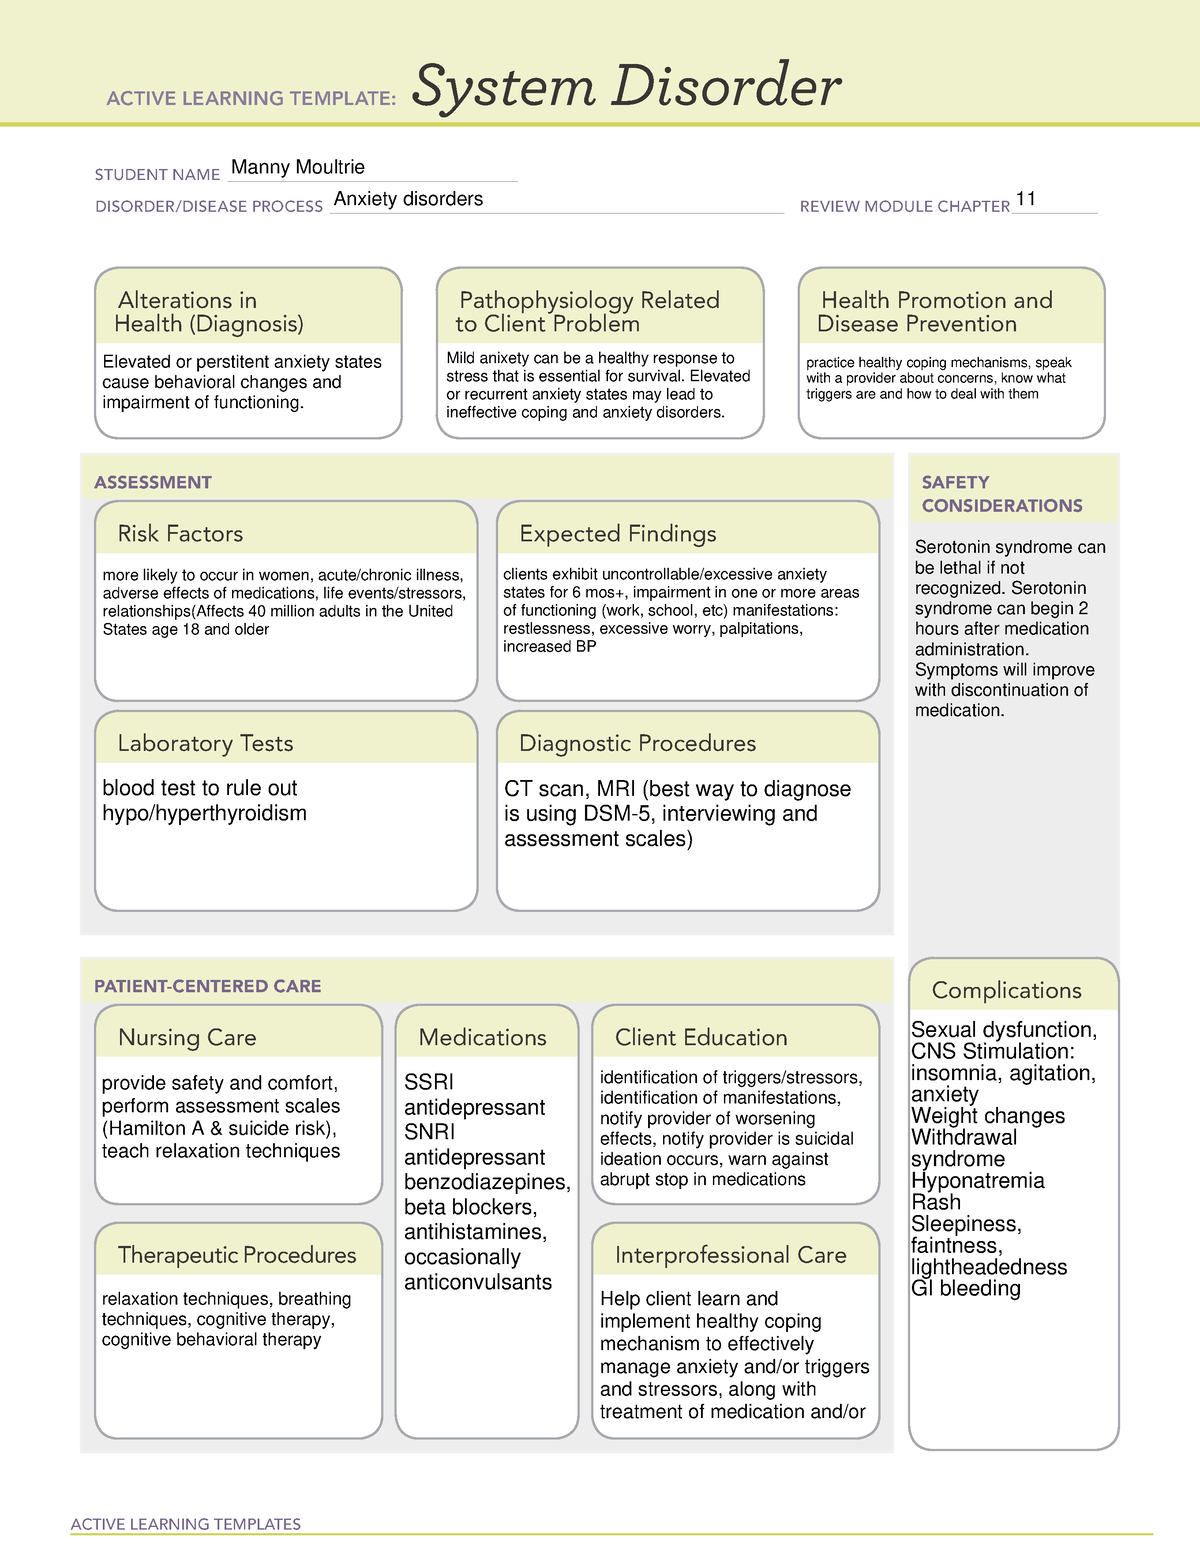 Anxiety System Disorder ATI Template ACTIVE LEARNING TEMPLATES System